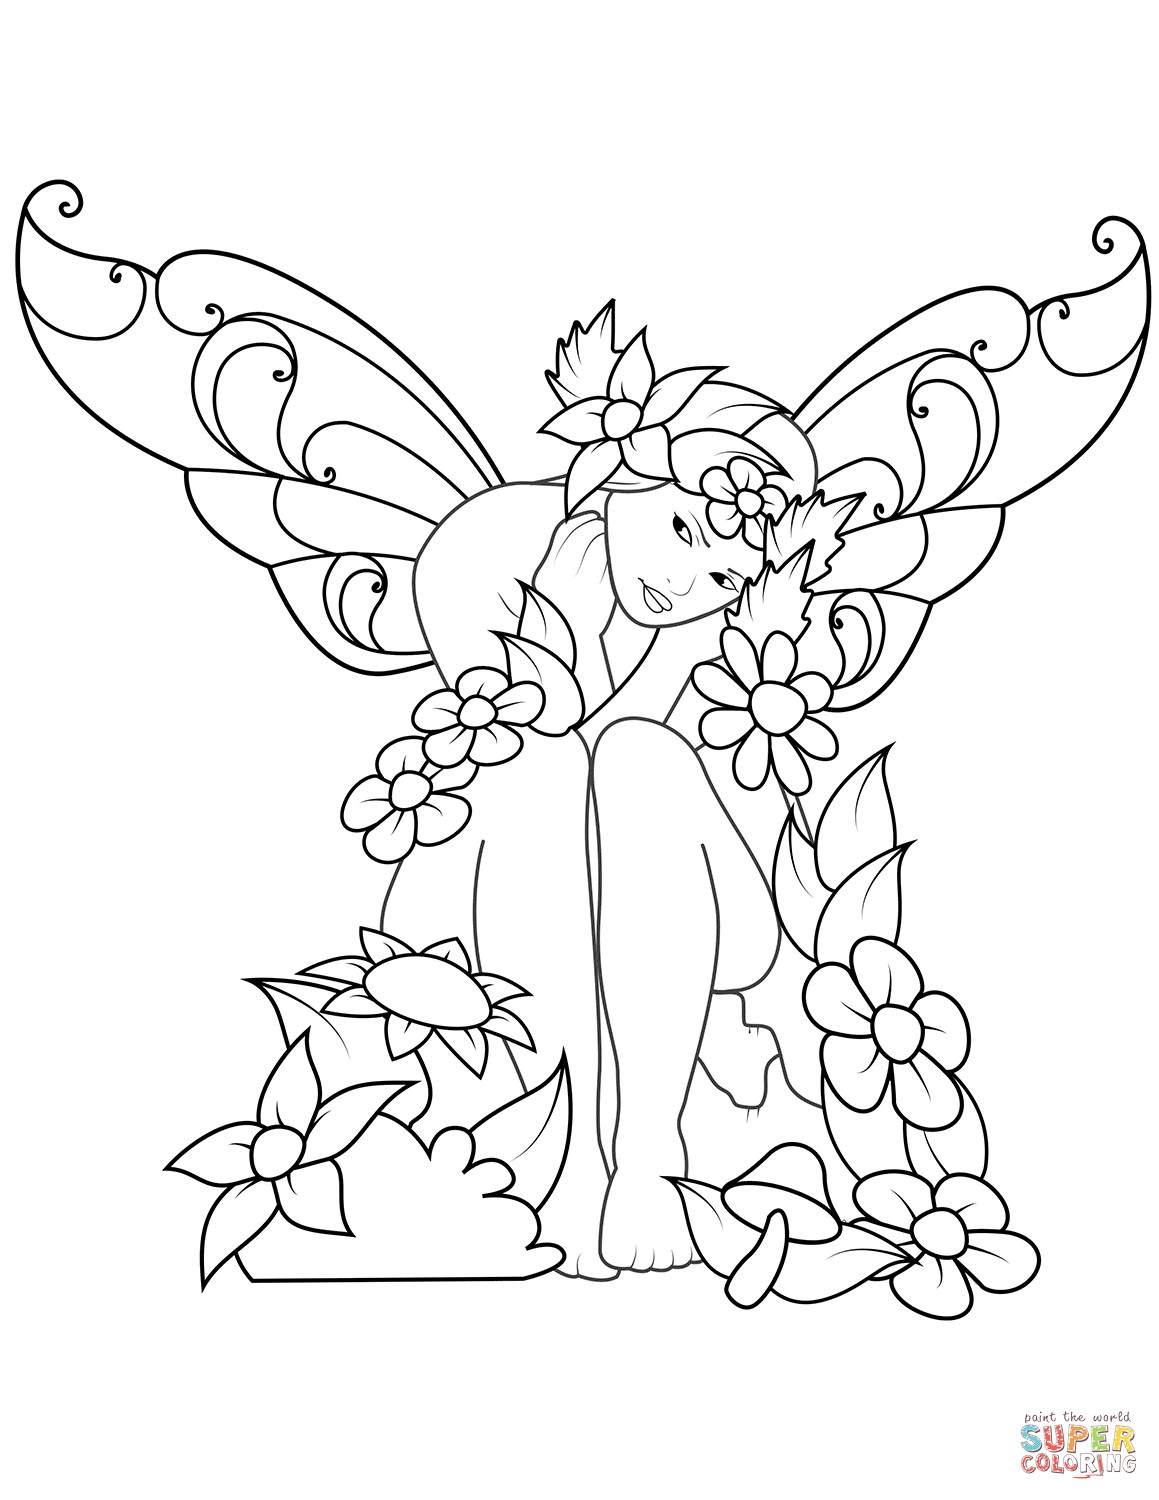 Fairy Coloring Sheet
 Sad Fairy coloring page